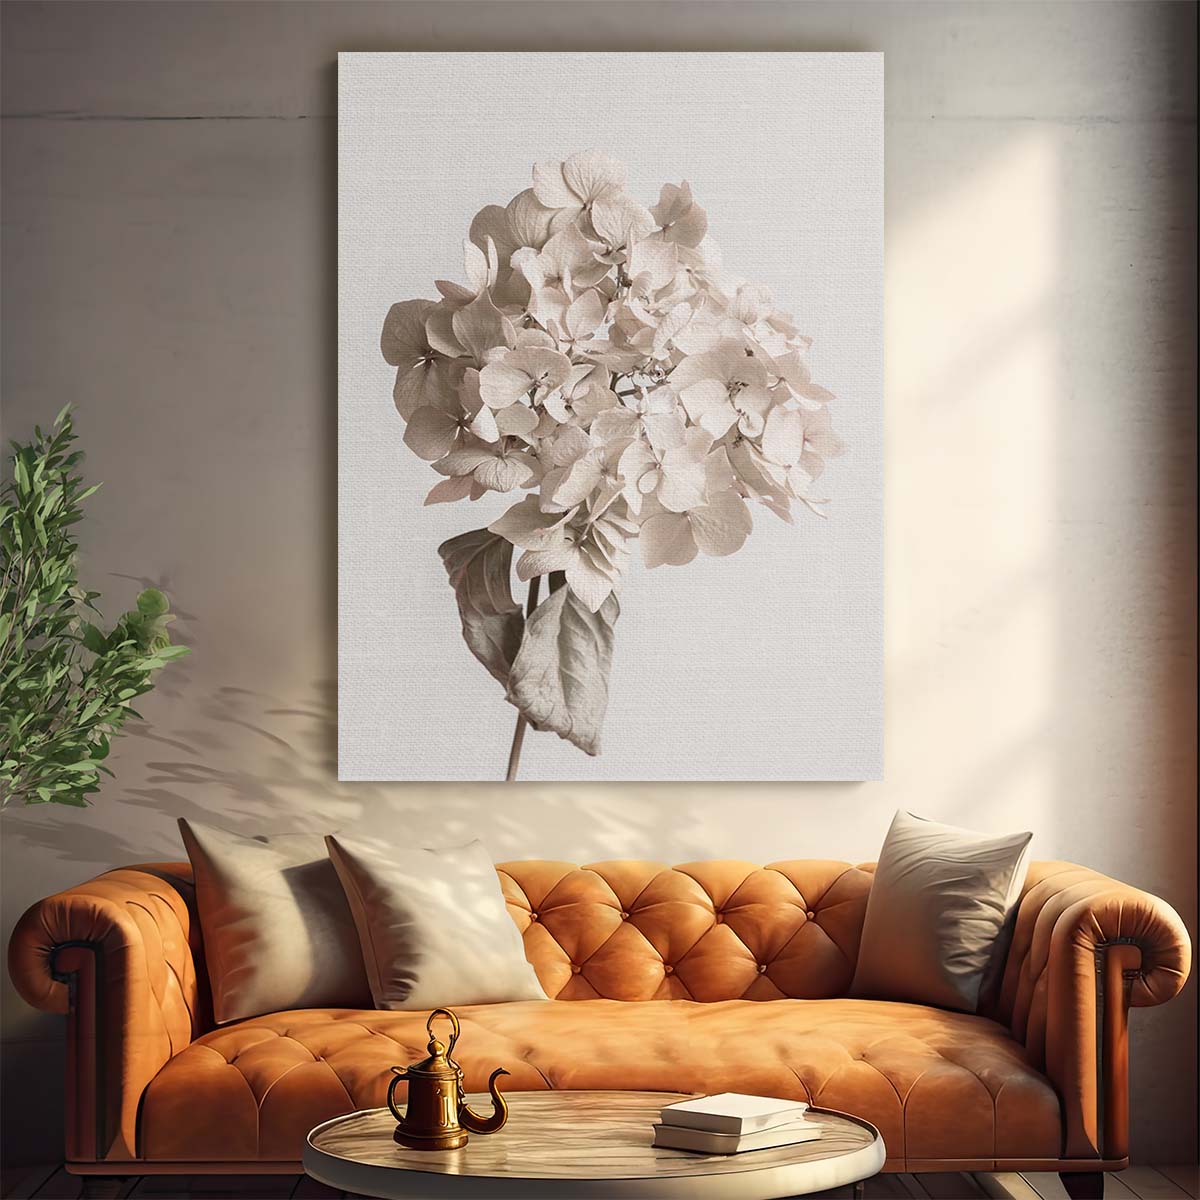 Beige Dried Flower Still Life Botanical Photography Art by Luxuriance Designs, made in USA